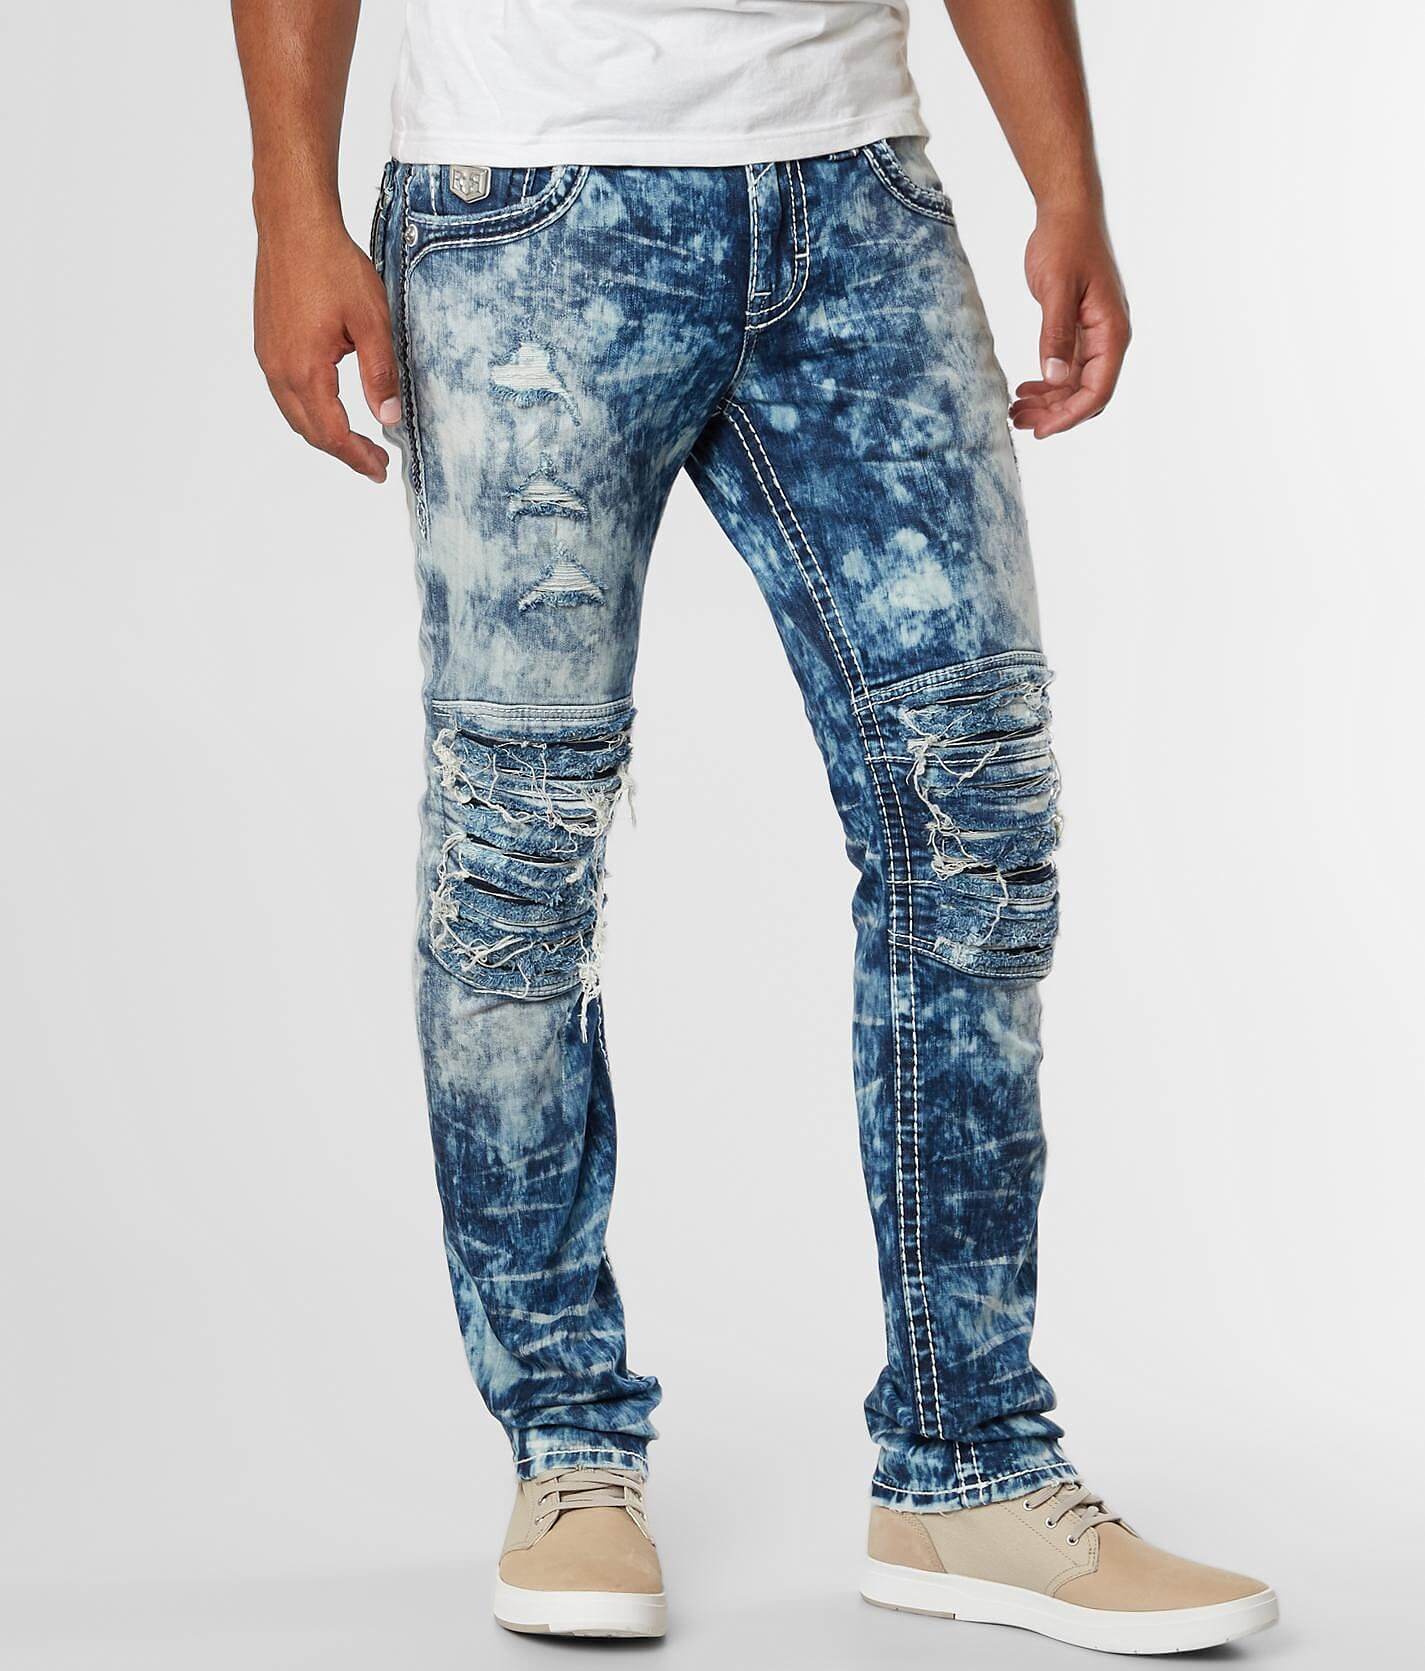 rock and revival mens jeans